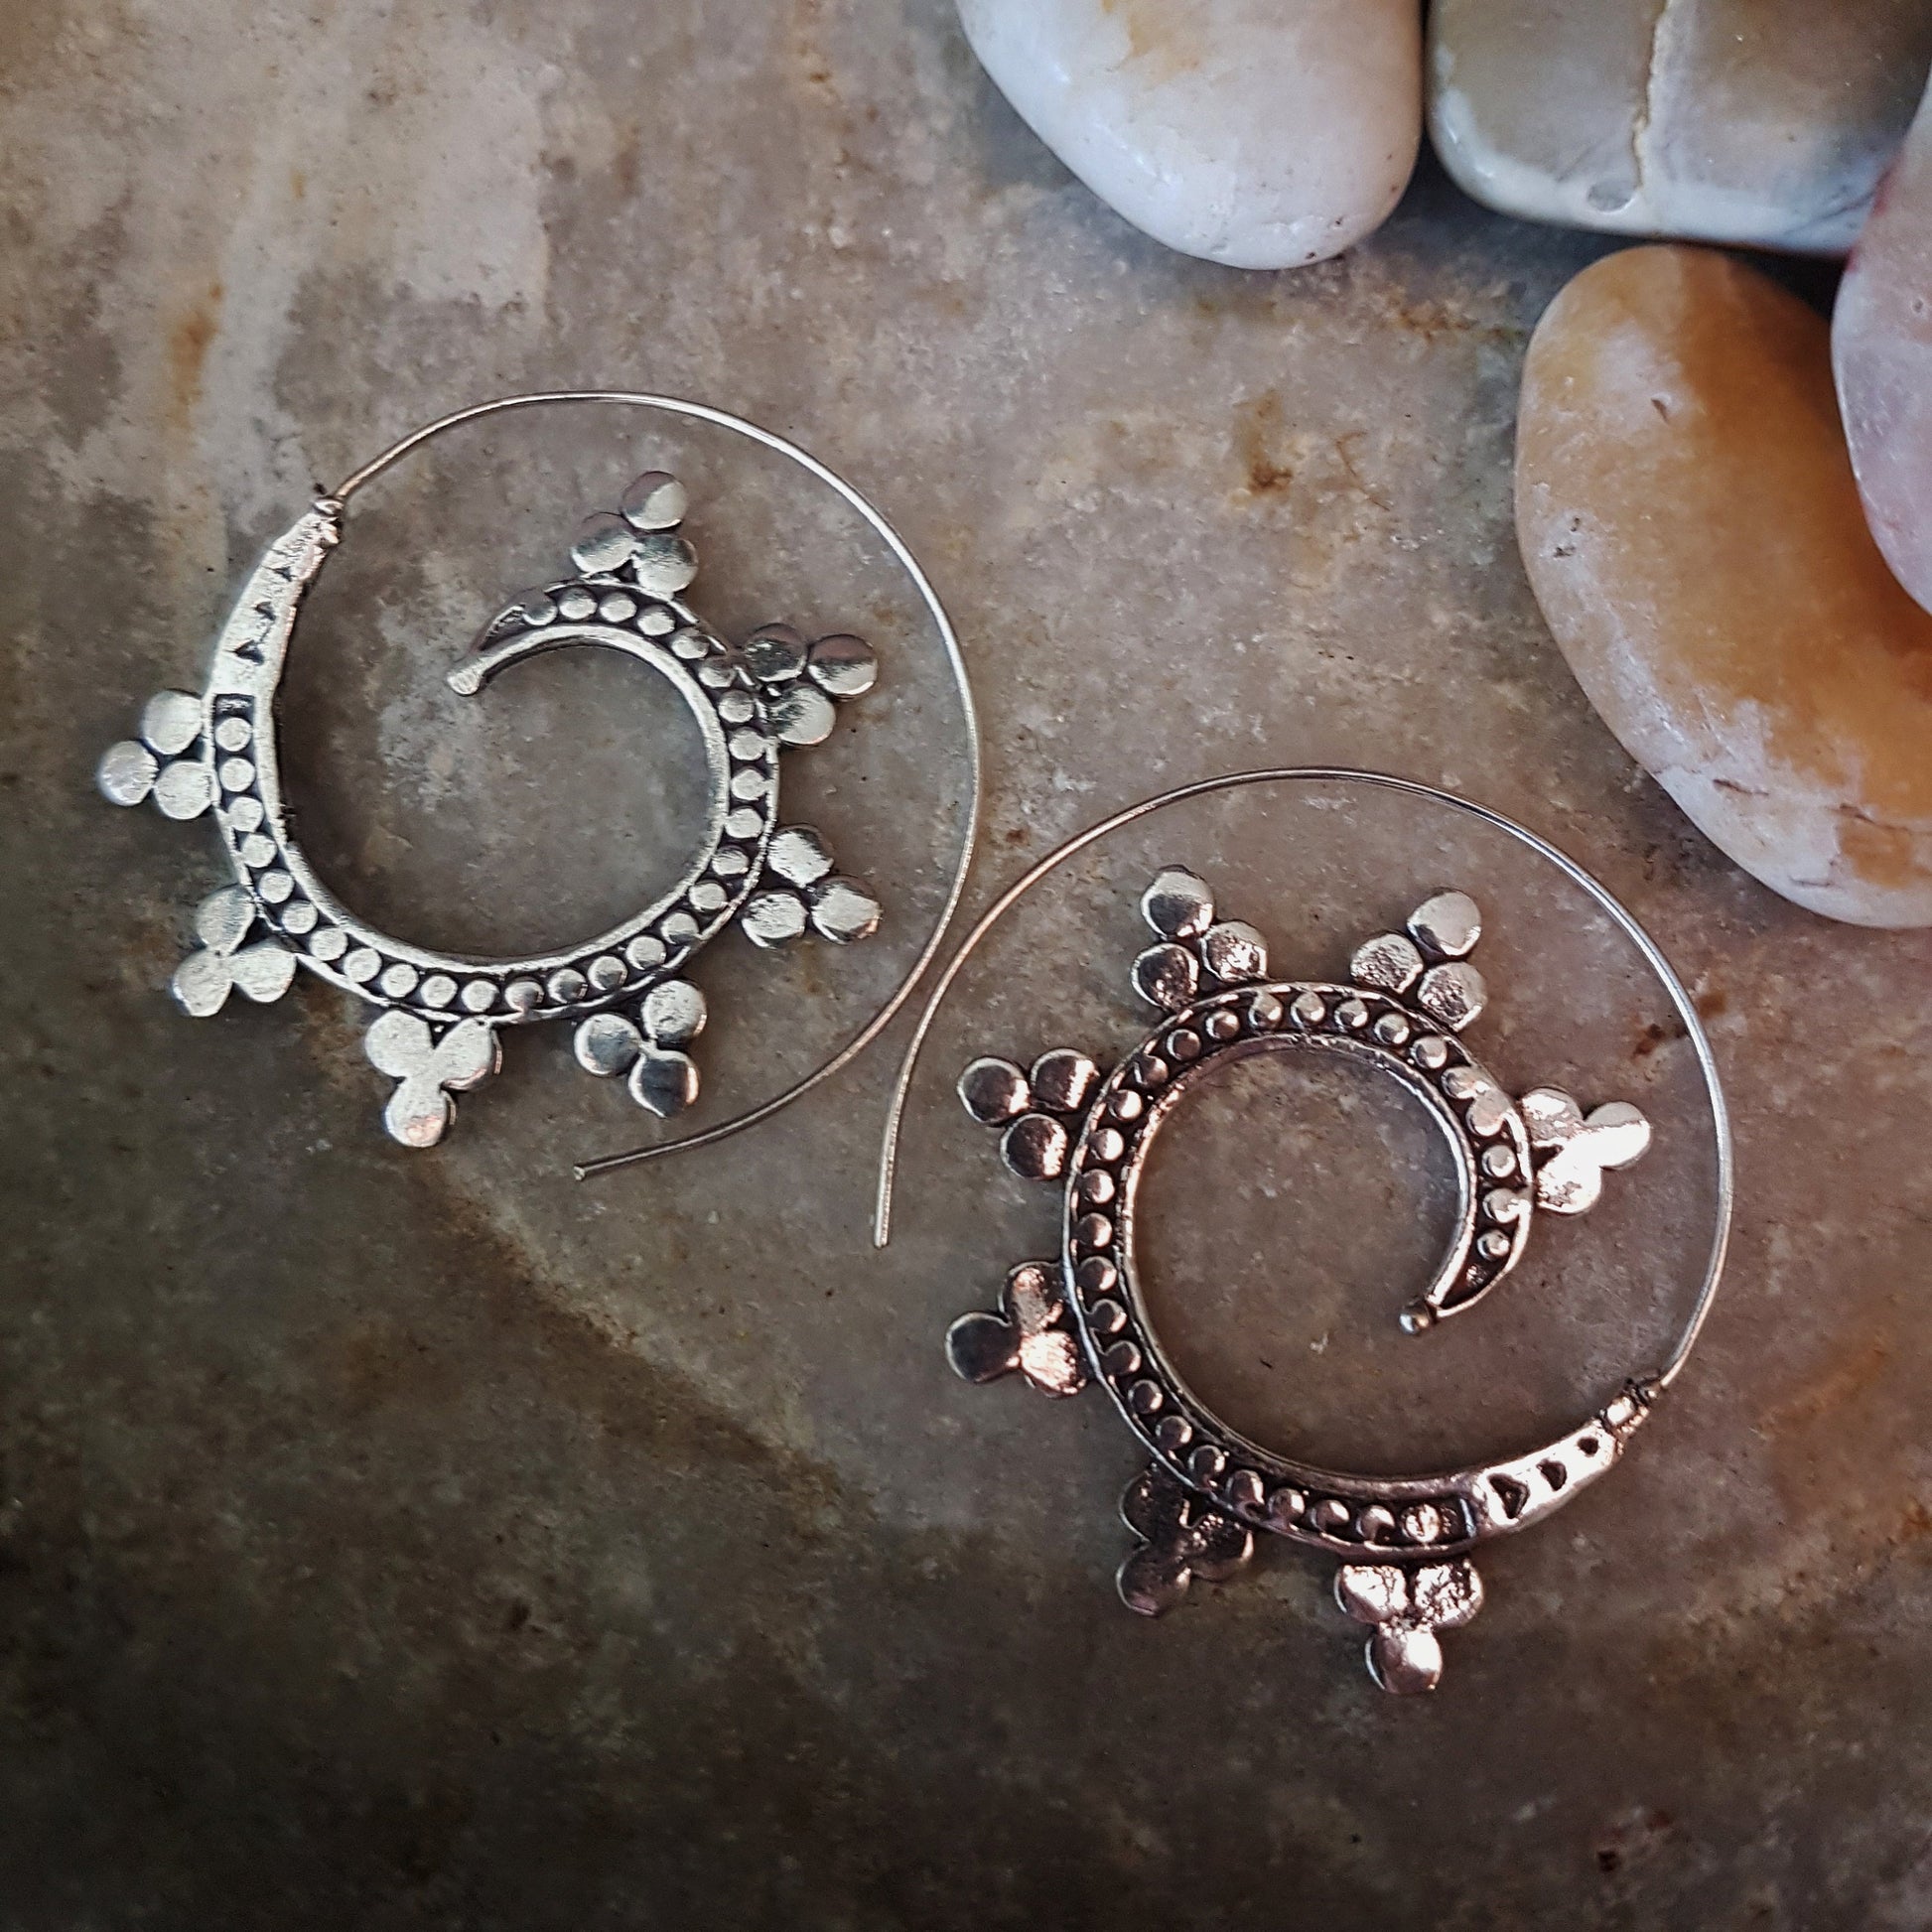 Silver threader earrings in open hoop spiral design. Boho tribal style in a unique hammered metal disc wave pattern. 1.75 inch diameter. - Vintage India Ca